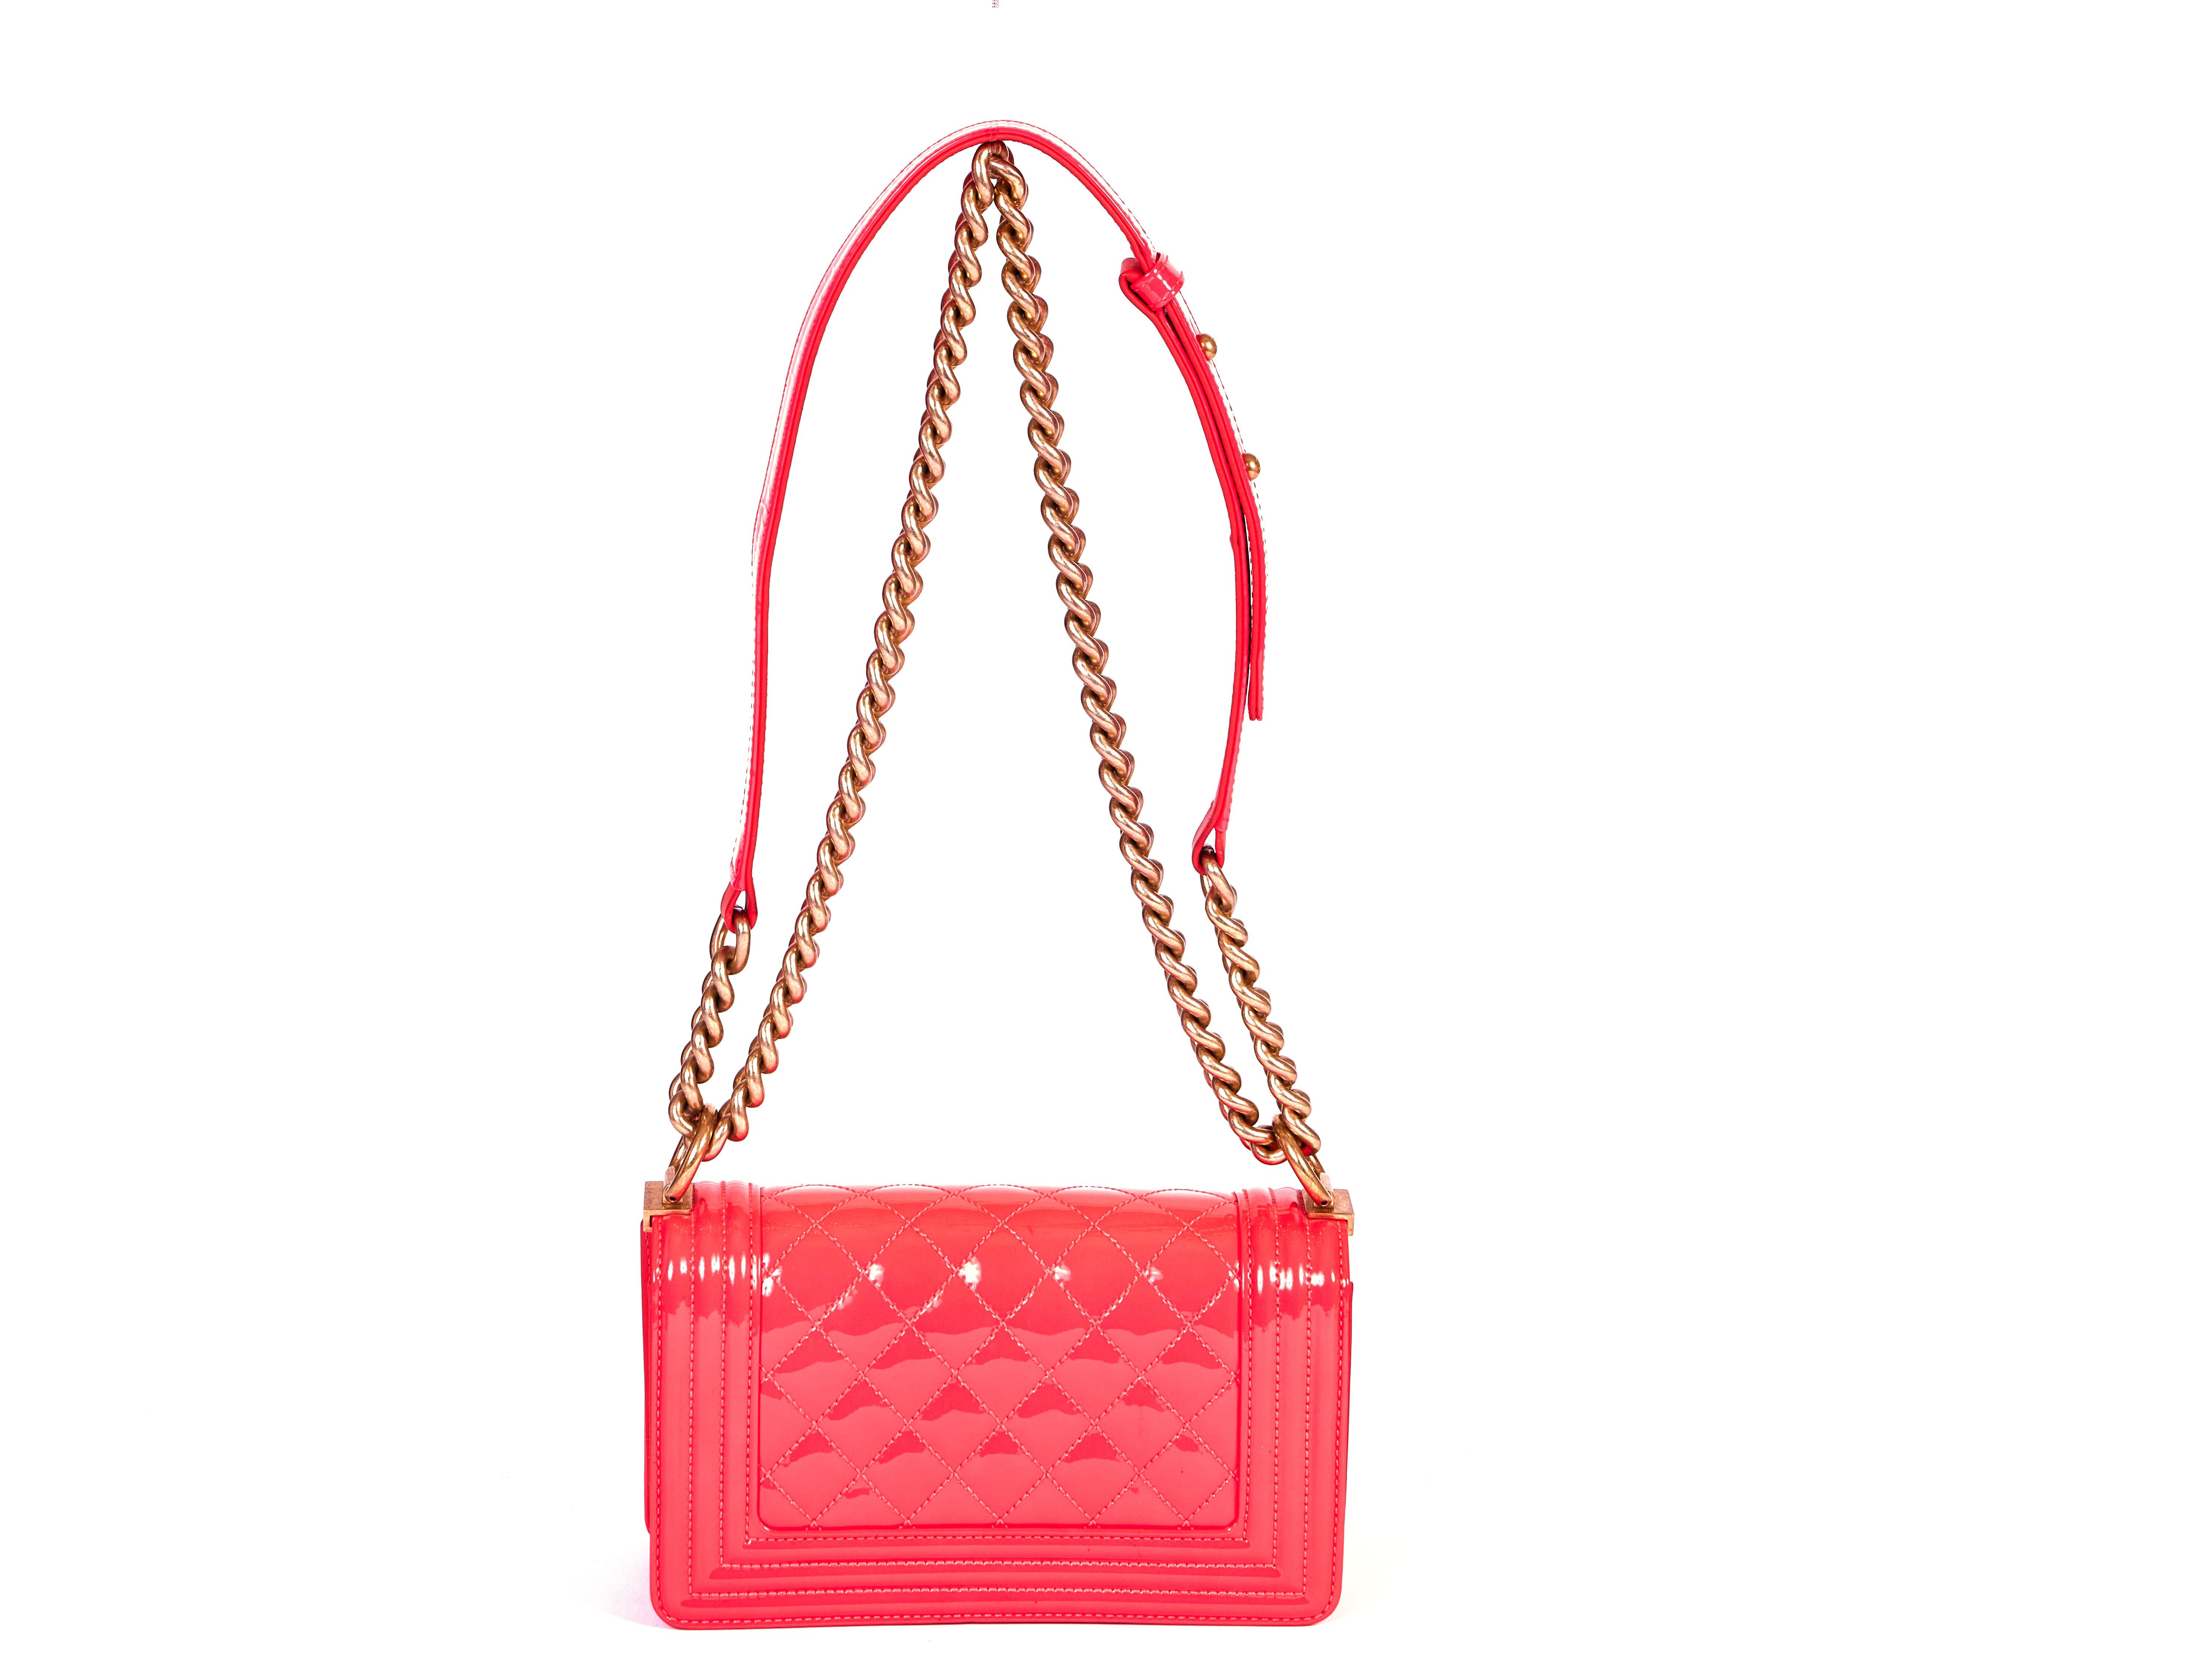 This glossy patent neon pink Chanel Boy Bag comes with a big chain in gold, which can be worn over the shoulder or cross body. Partial plastic still on hardware. The shoulder drop is 21 inches. It has the original Chanel dust bag. According to the